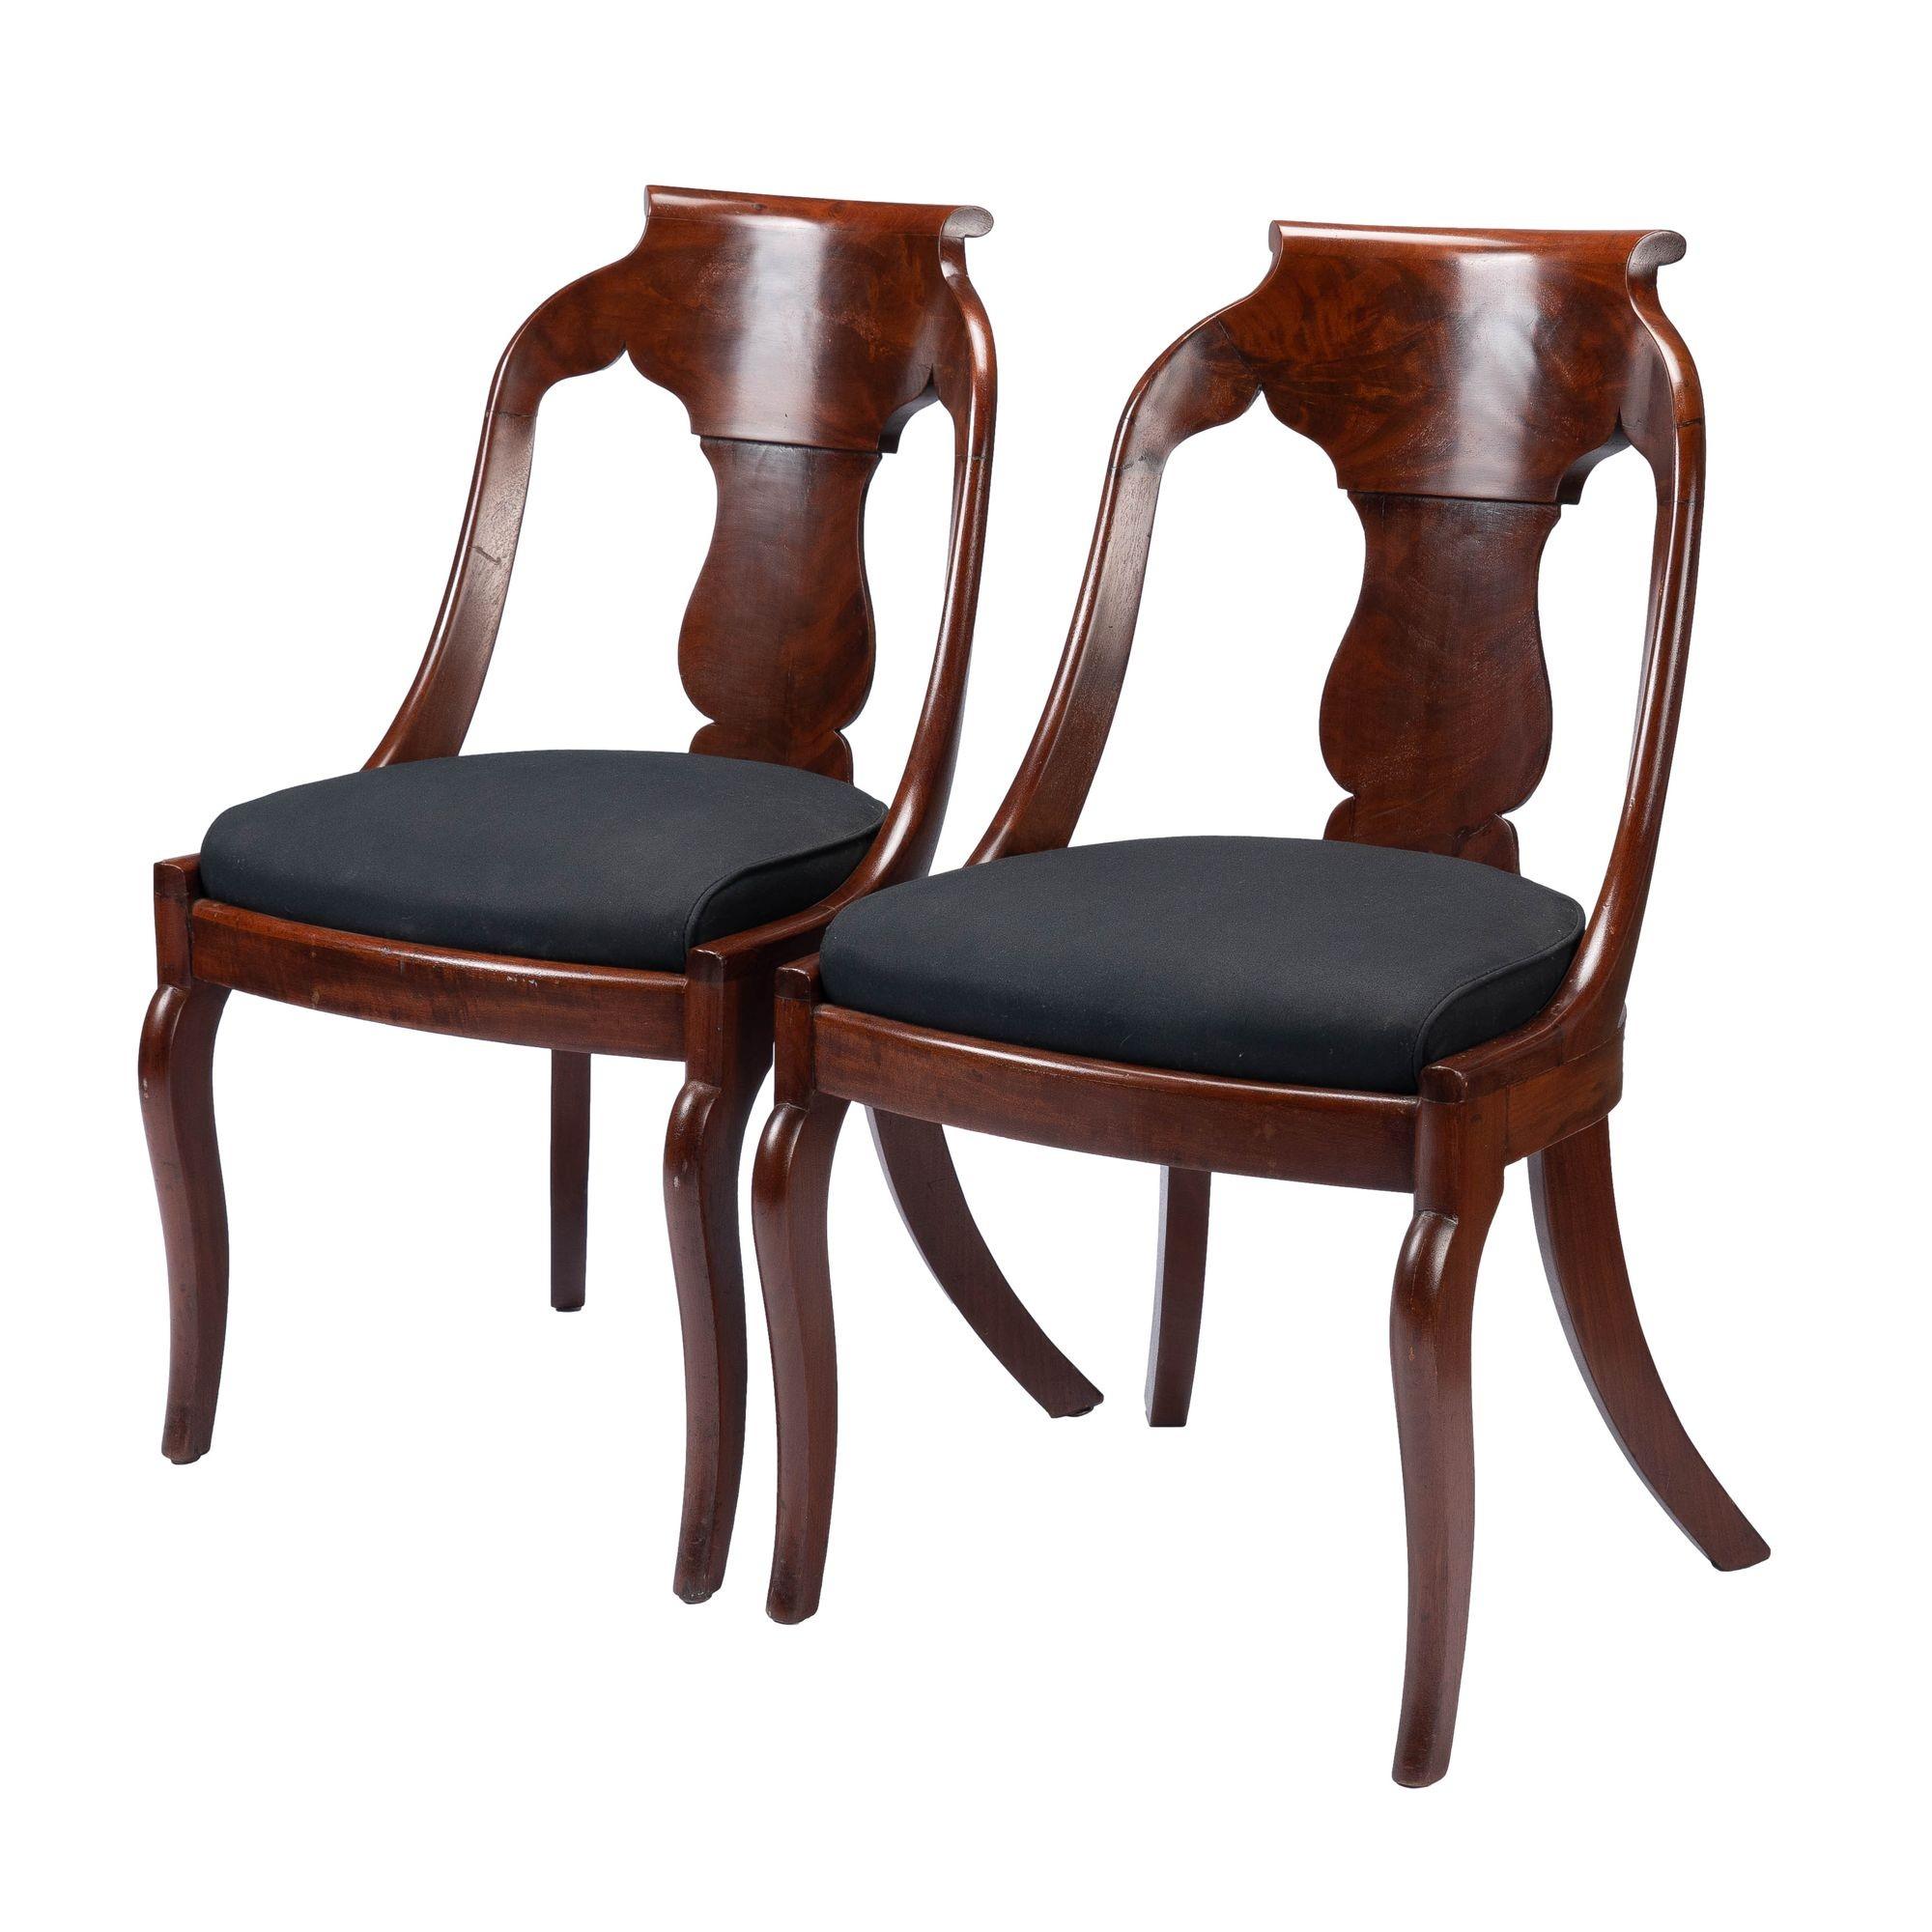 Neoclassical Pair of American Mahogany Upholstered Slip Seat Gondola Chairs, '1830-1935' For Sale